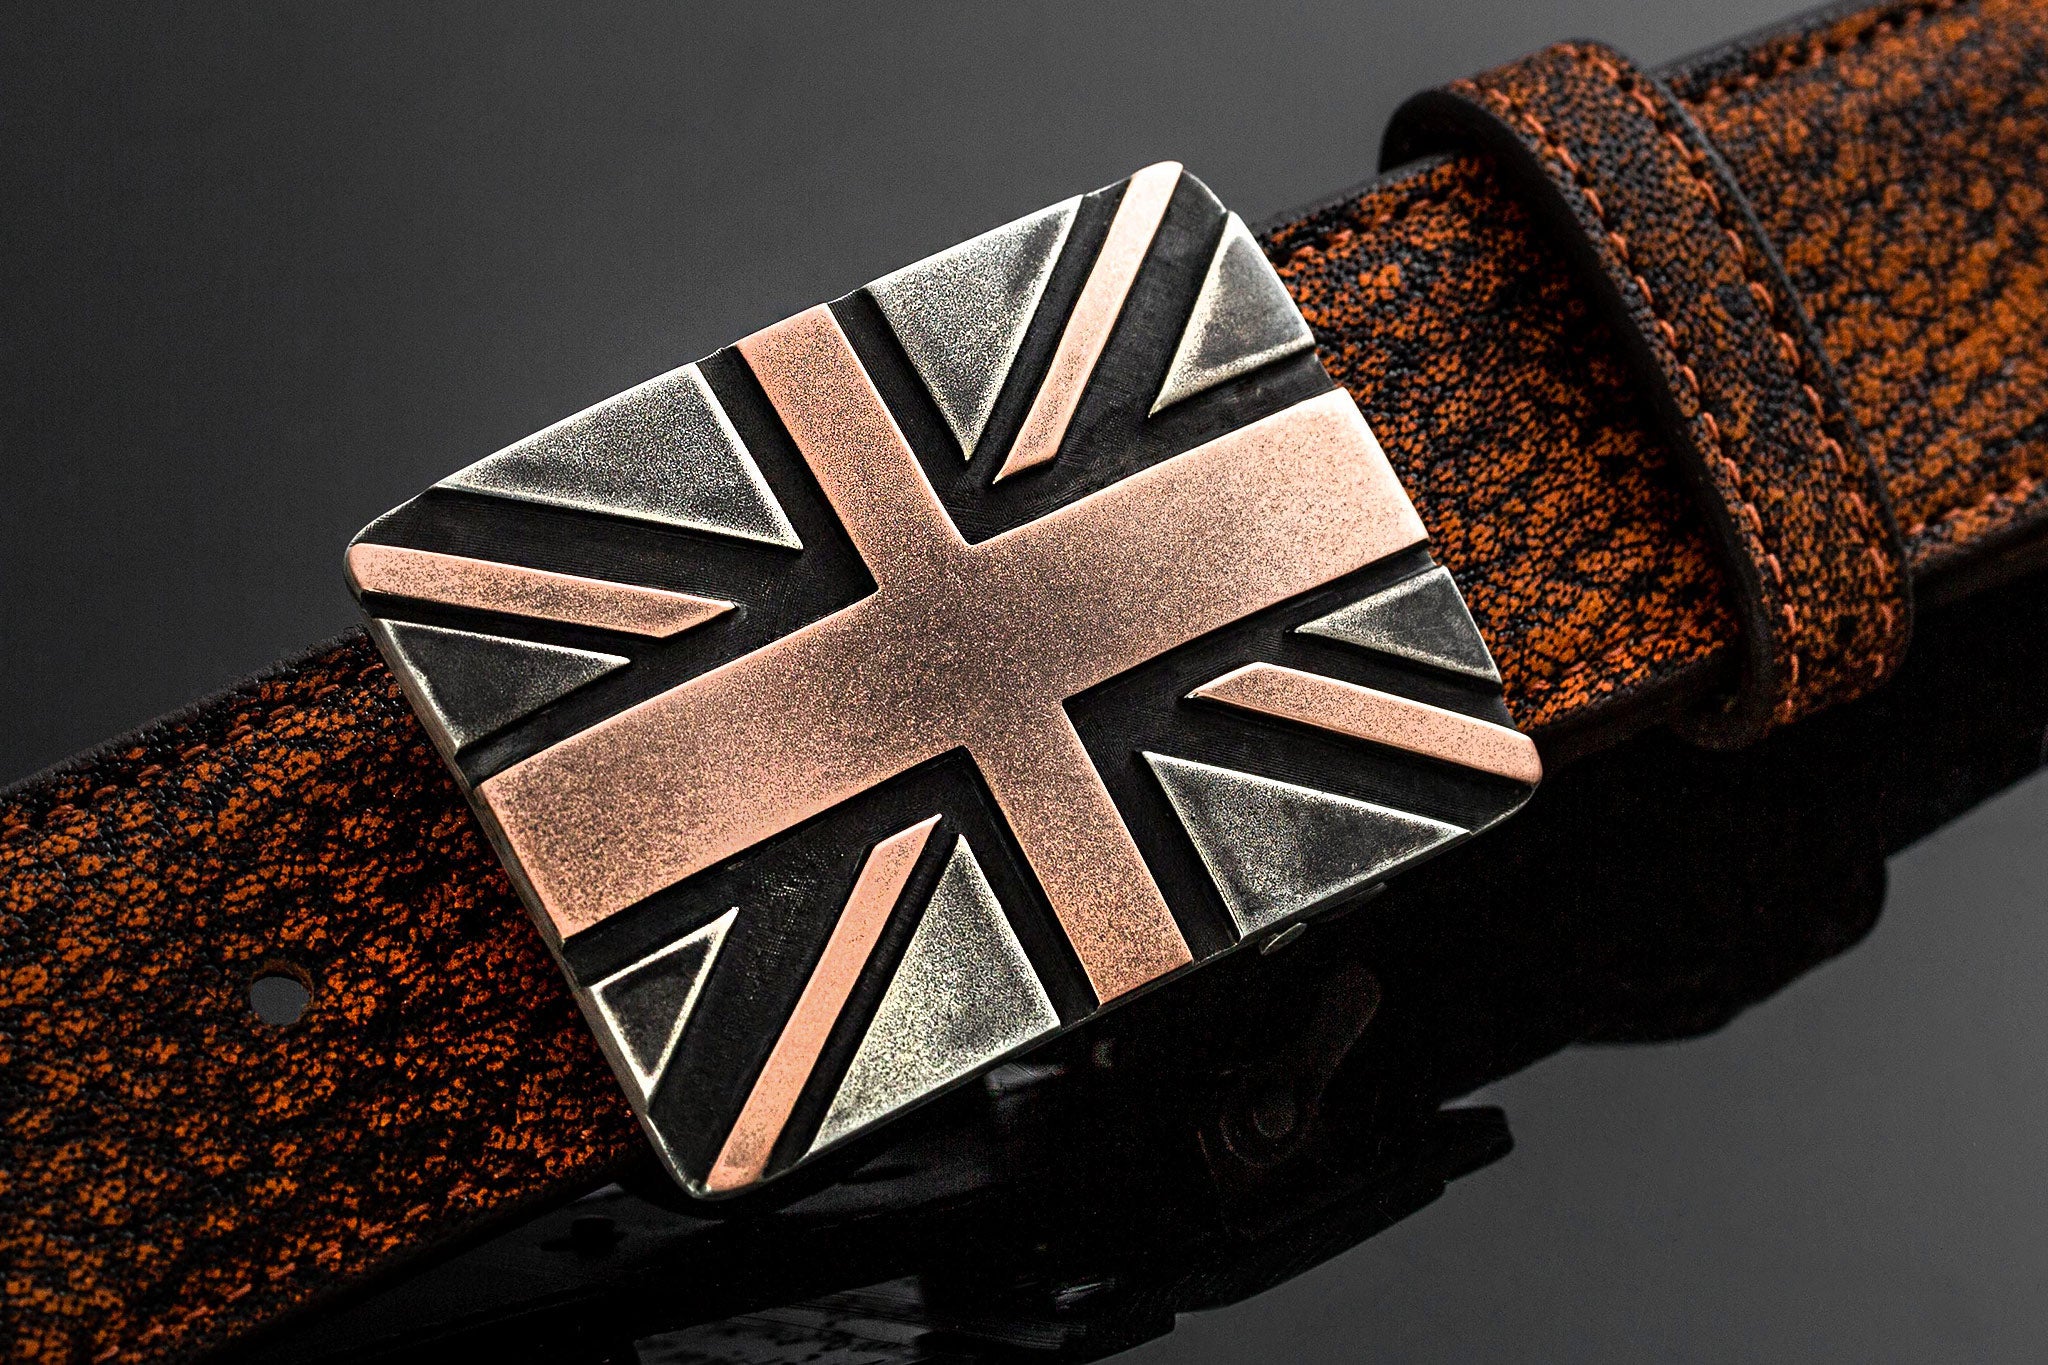 Mesa Union Jack | Belts And Buckles - Trophy | Comstock Heritage